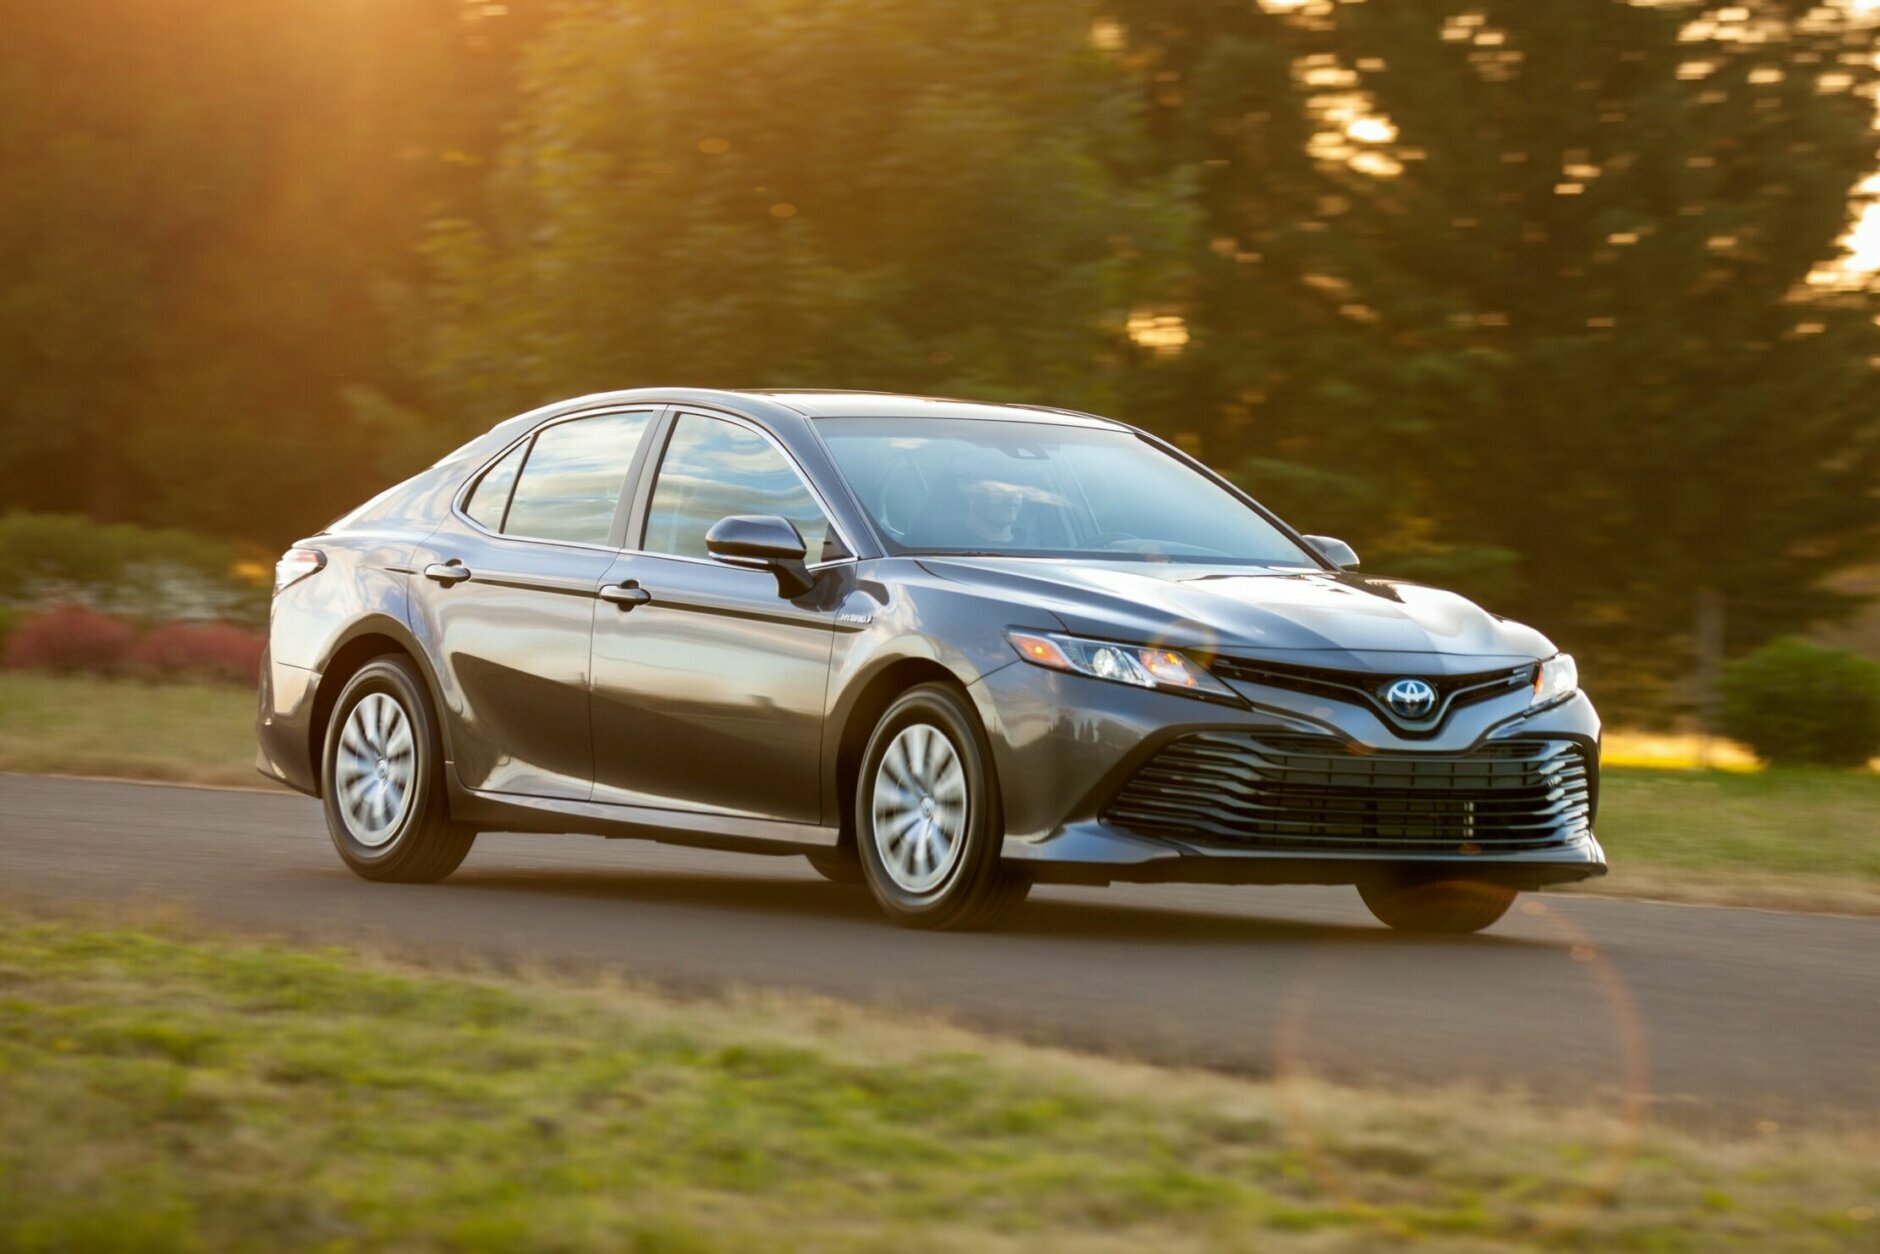 <p><strong>Best new car for teens, $35,000 to $40,000:</strong> The Toyota Camry Hybrid</p>
